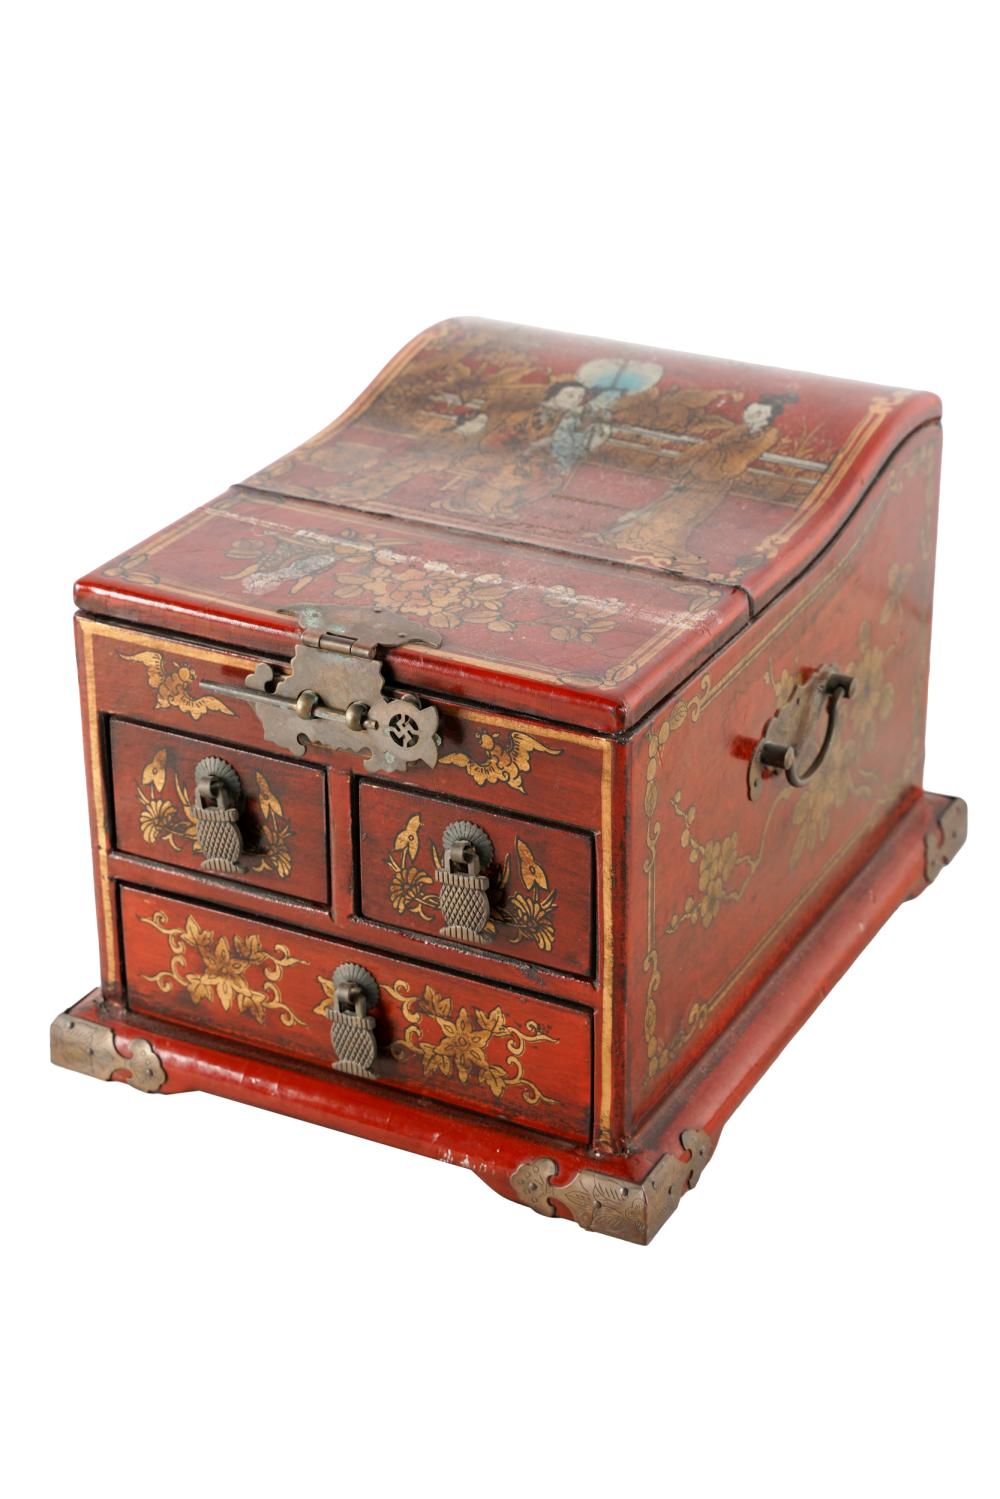 CHINESE RED LEATHER-CLAD JEWELRY BOXthe